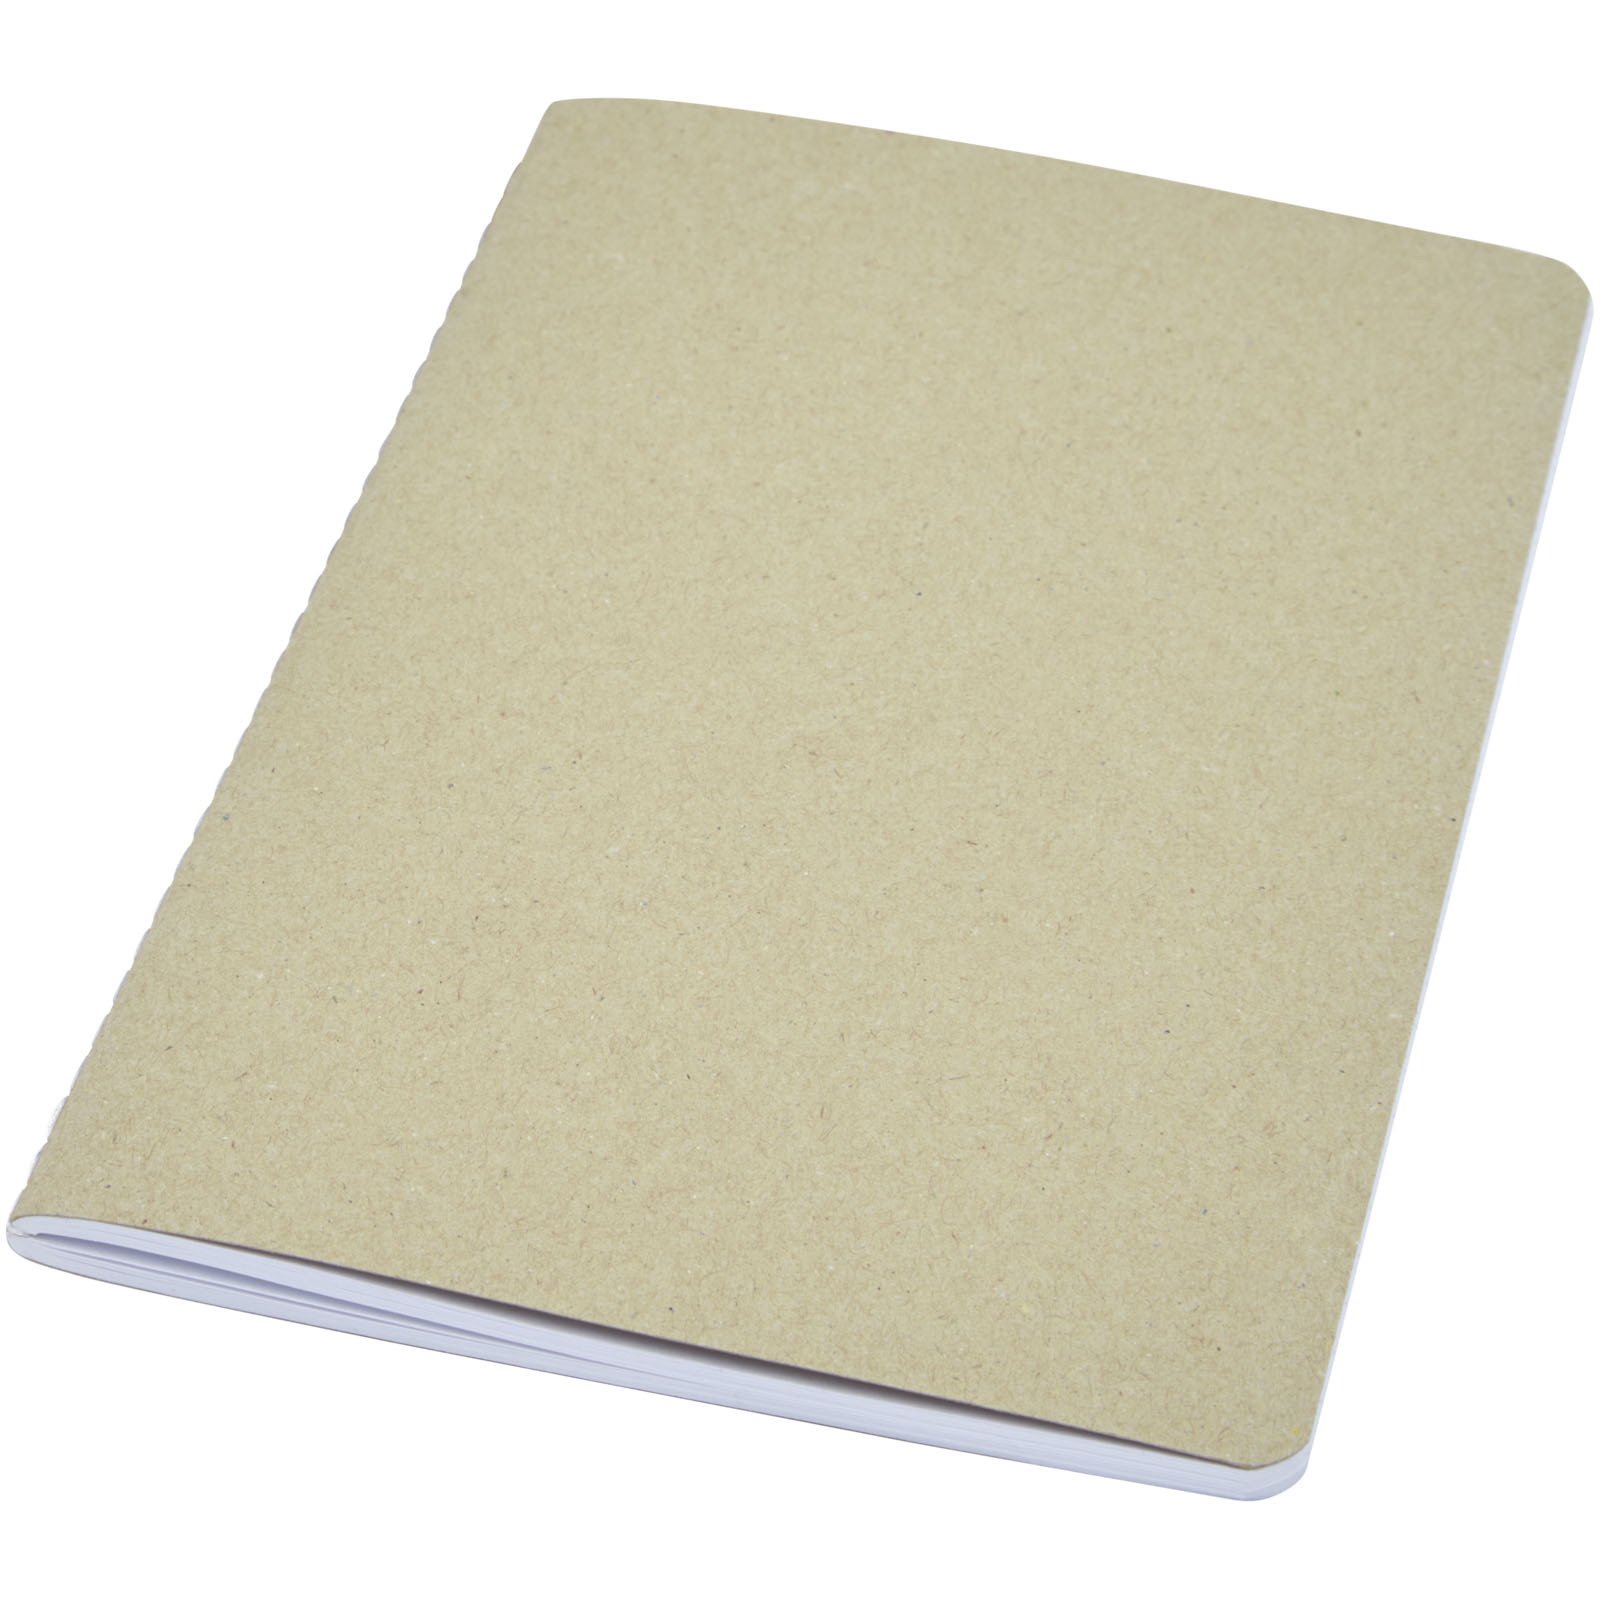 Advertising Notebooks - Gianna recycled cardboard notebook